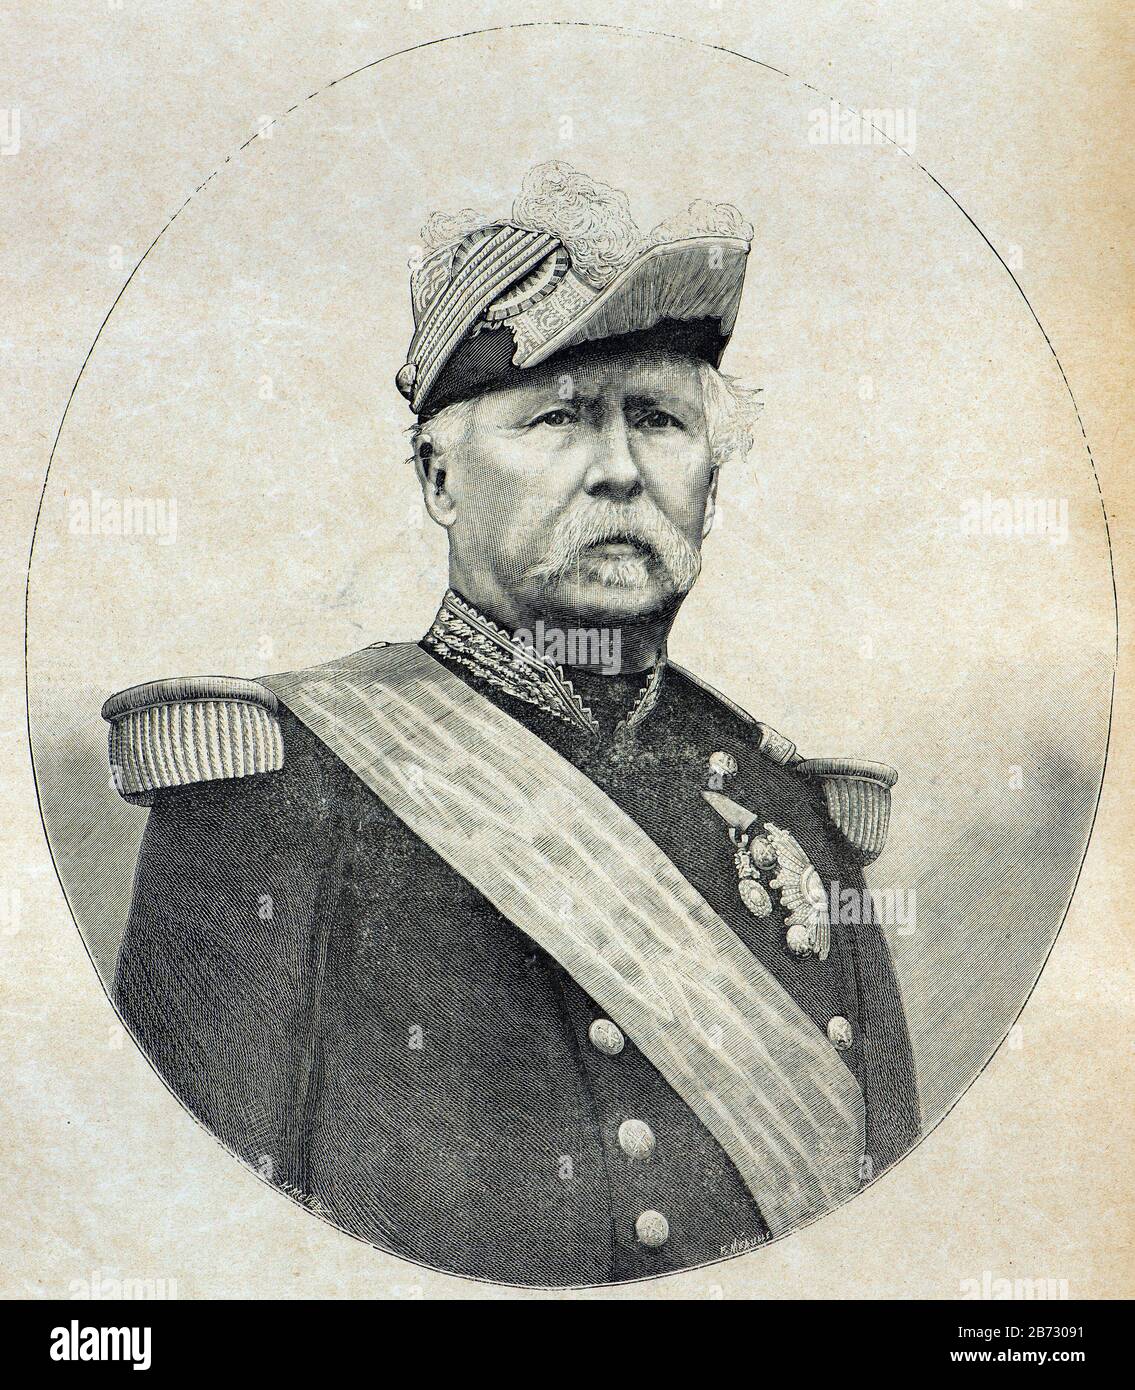 Engraving - Portrait of Patrice de Mac Mahon (1808 - 1893) Marshal of France and President of the Republic - Private collection Stock Photo